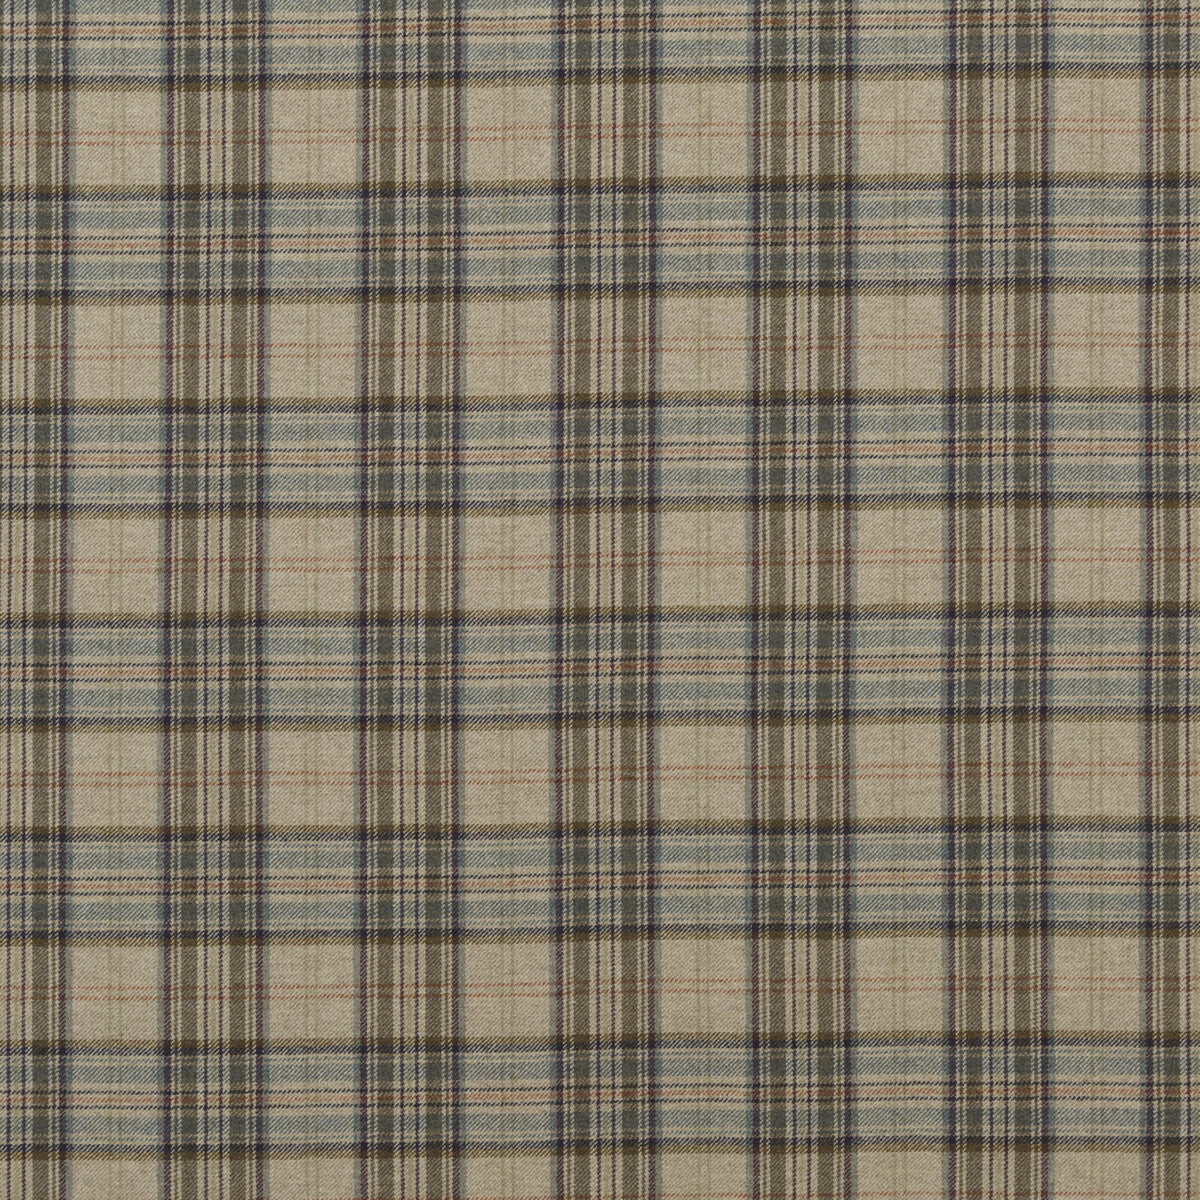 Victoria Plaid fabric in soft jade color - pattern BF10655.3.0 - by G P &amp; J Baker in the Historic Royal Palaces collection